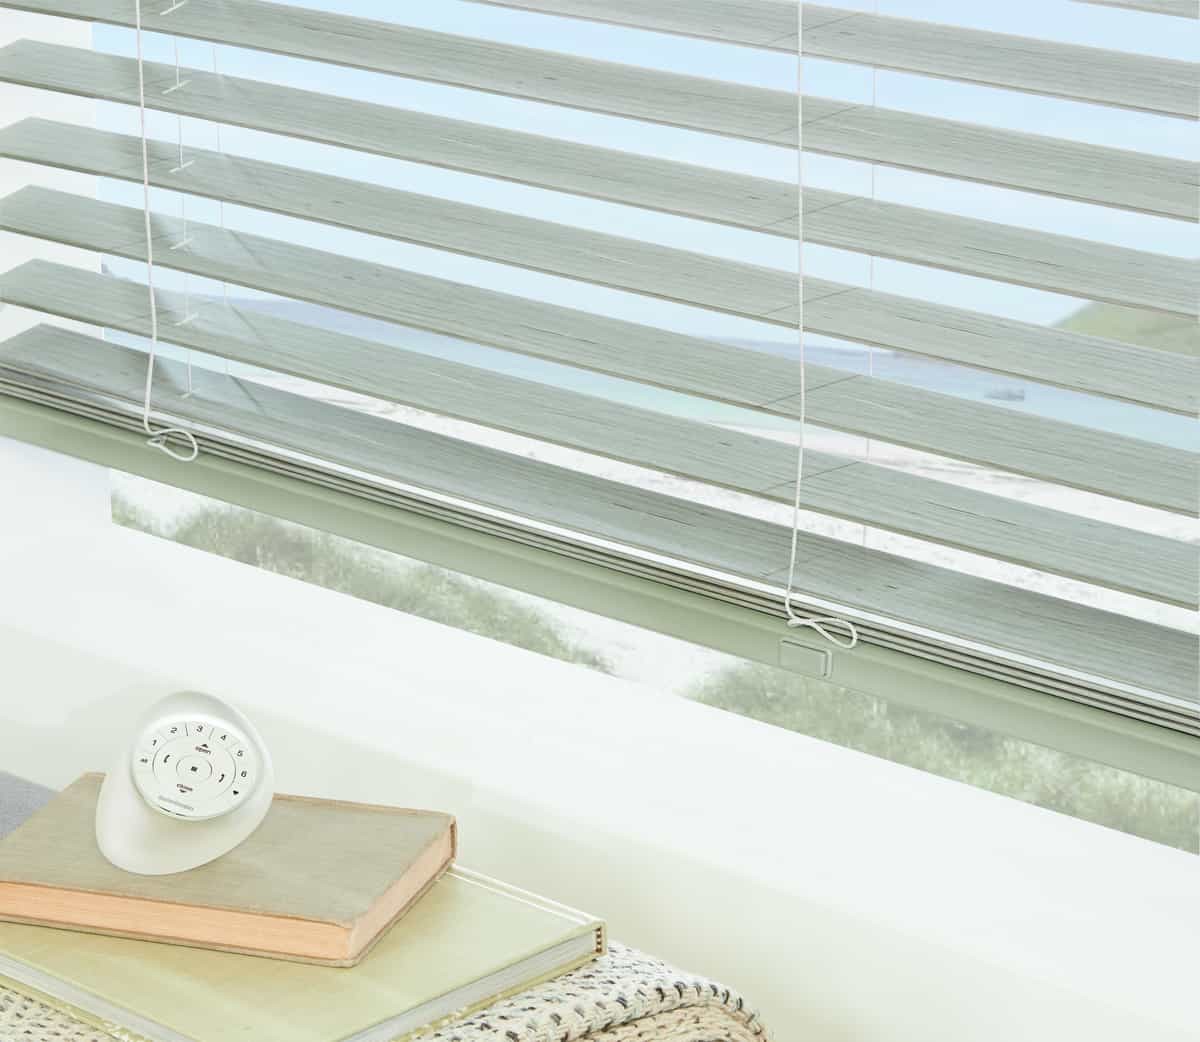 EverWood® Alternative Wood Blinds near Amarillo, Texas (TX) and other window treatments from Hunter Douglas.